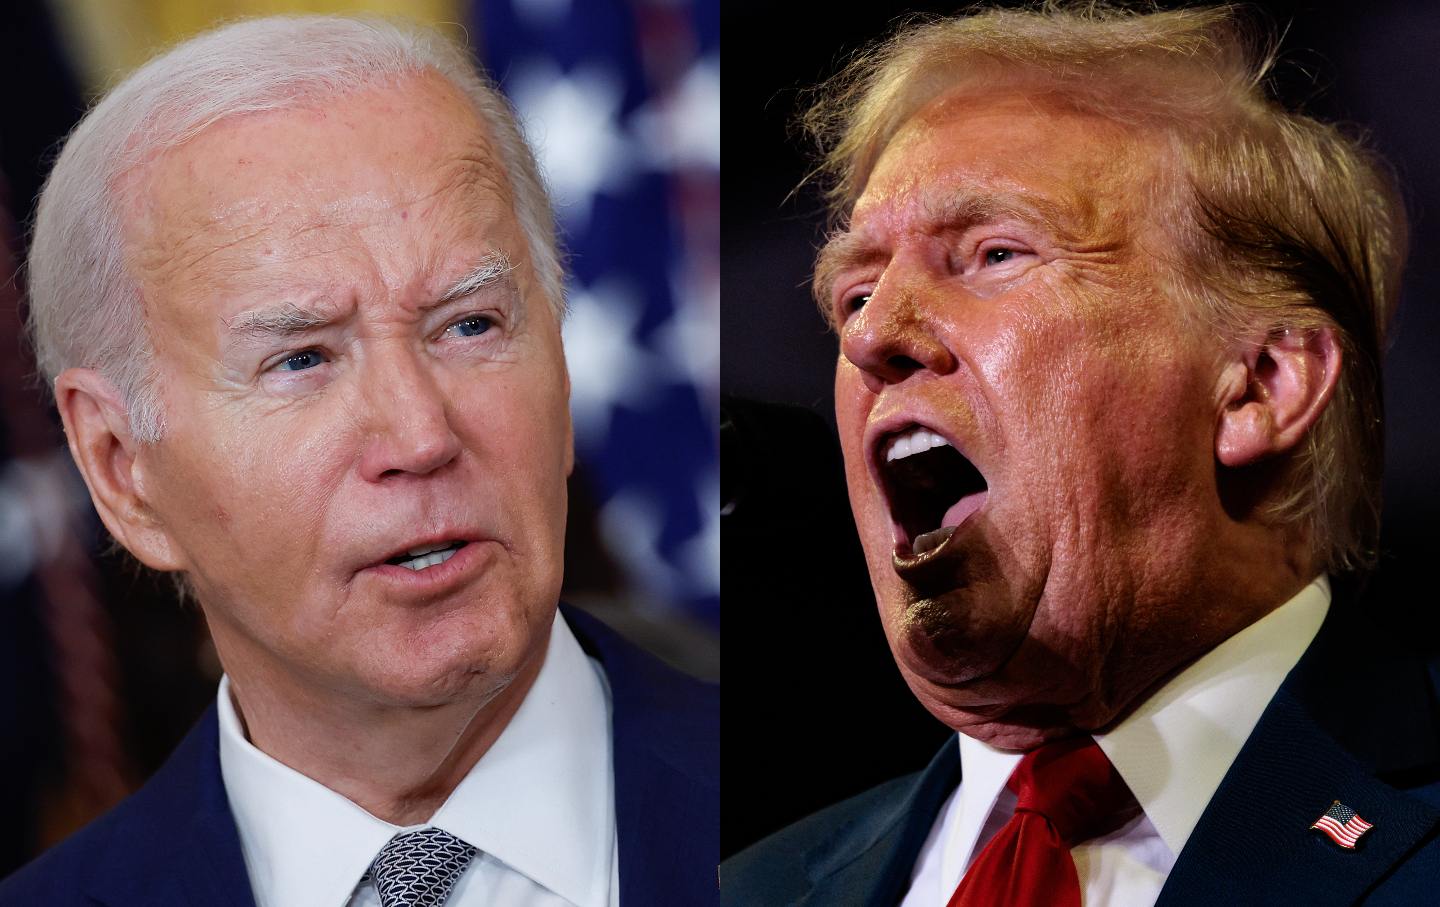 Joe Biden and Donald Trump side-by-side picture